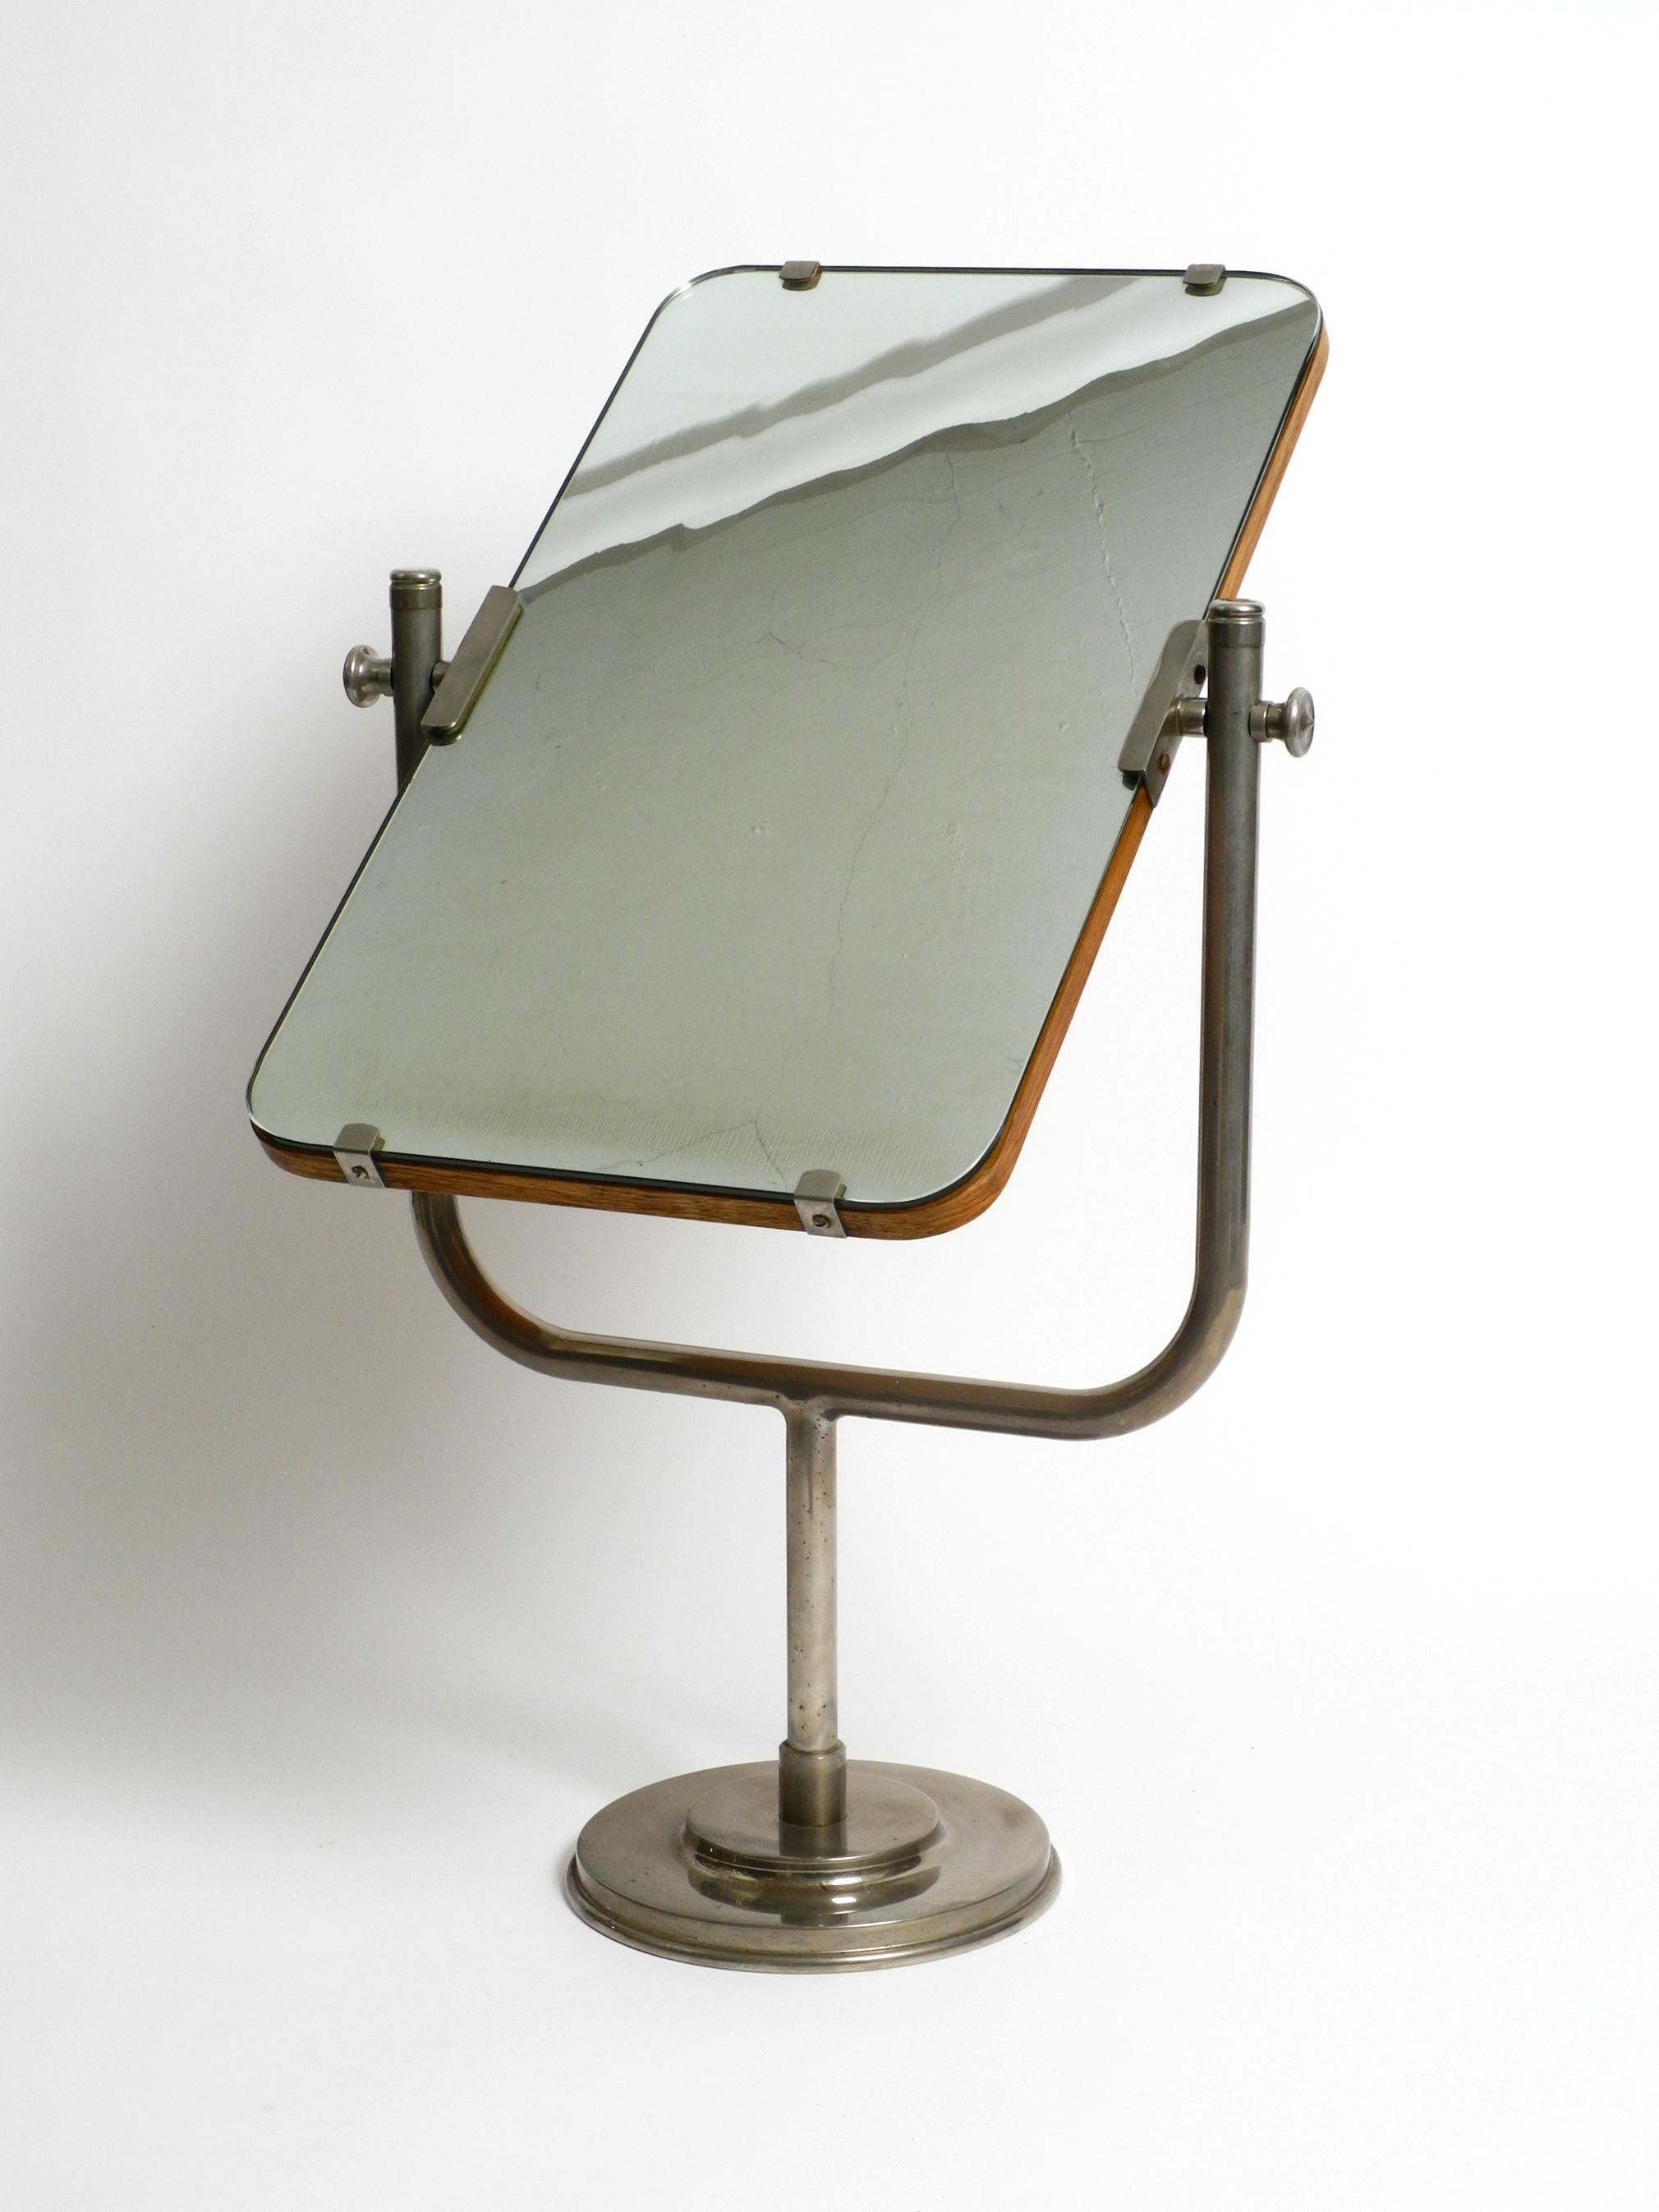 Fantastically beautiful huge 1930s swiveling table mirror.
Great pre-war German design.
The mirror can be moved freely and fixed with the screws.
The frame is made entirely of nickel-plated metal. Heavy foot for stable standing.
The 7 mm thick